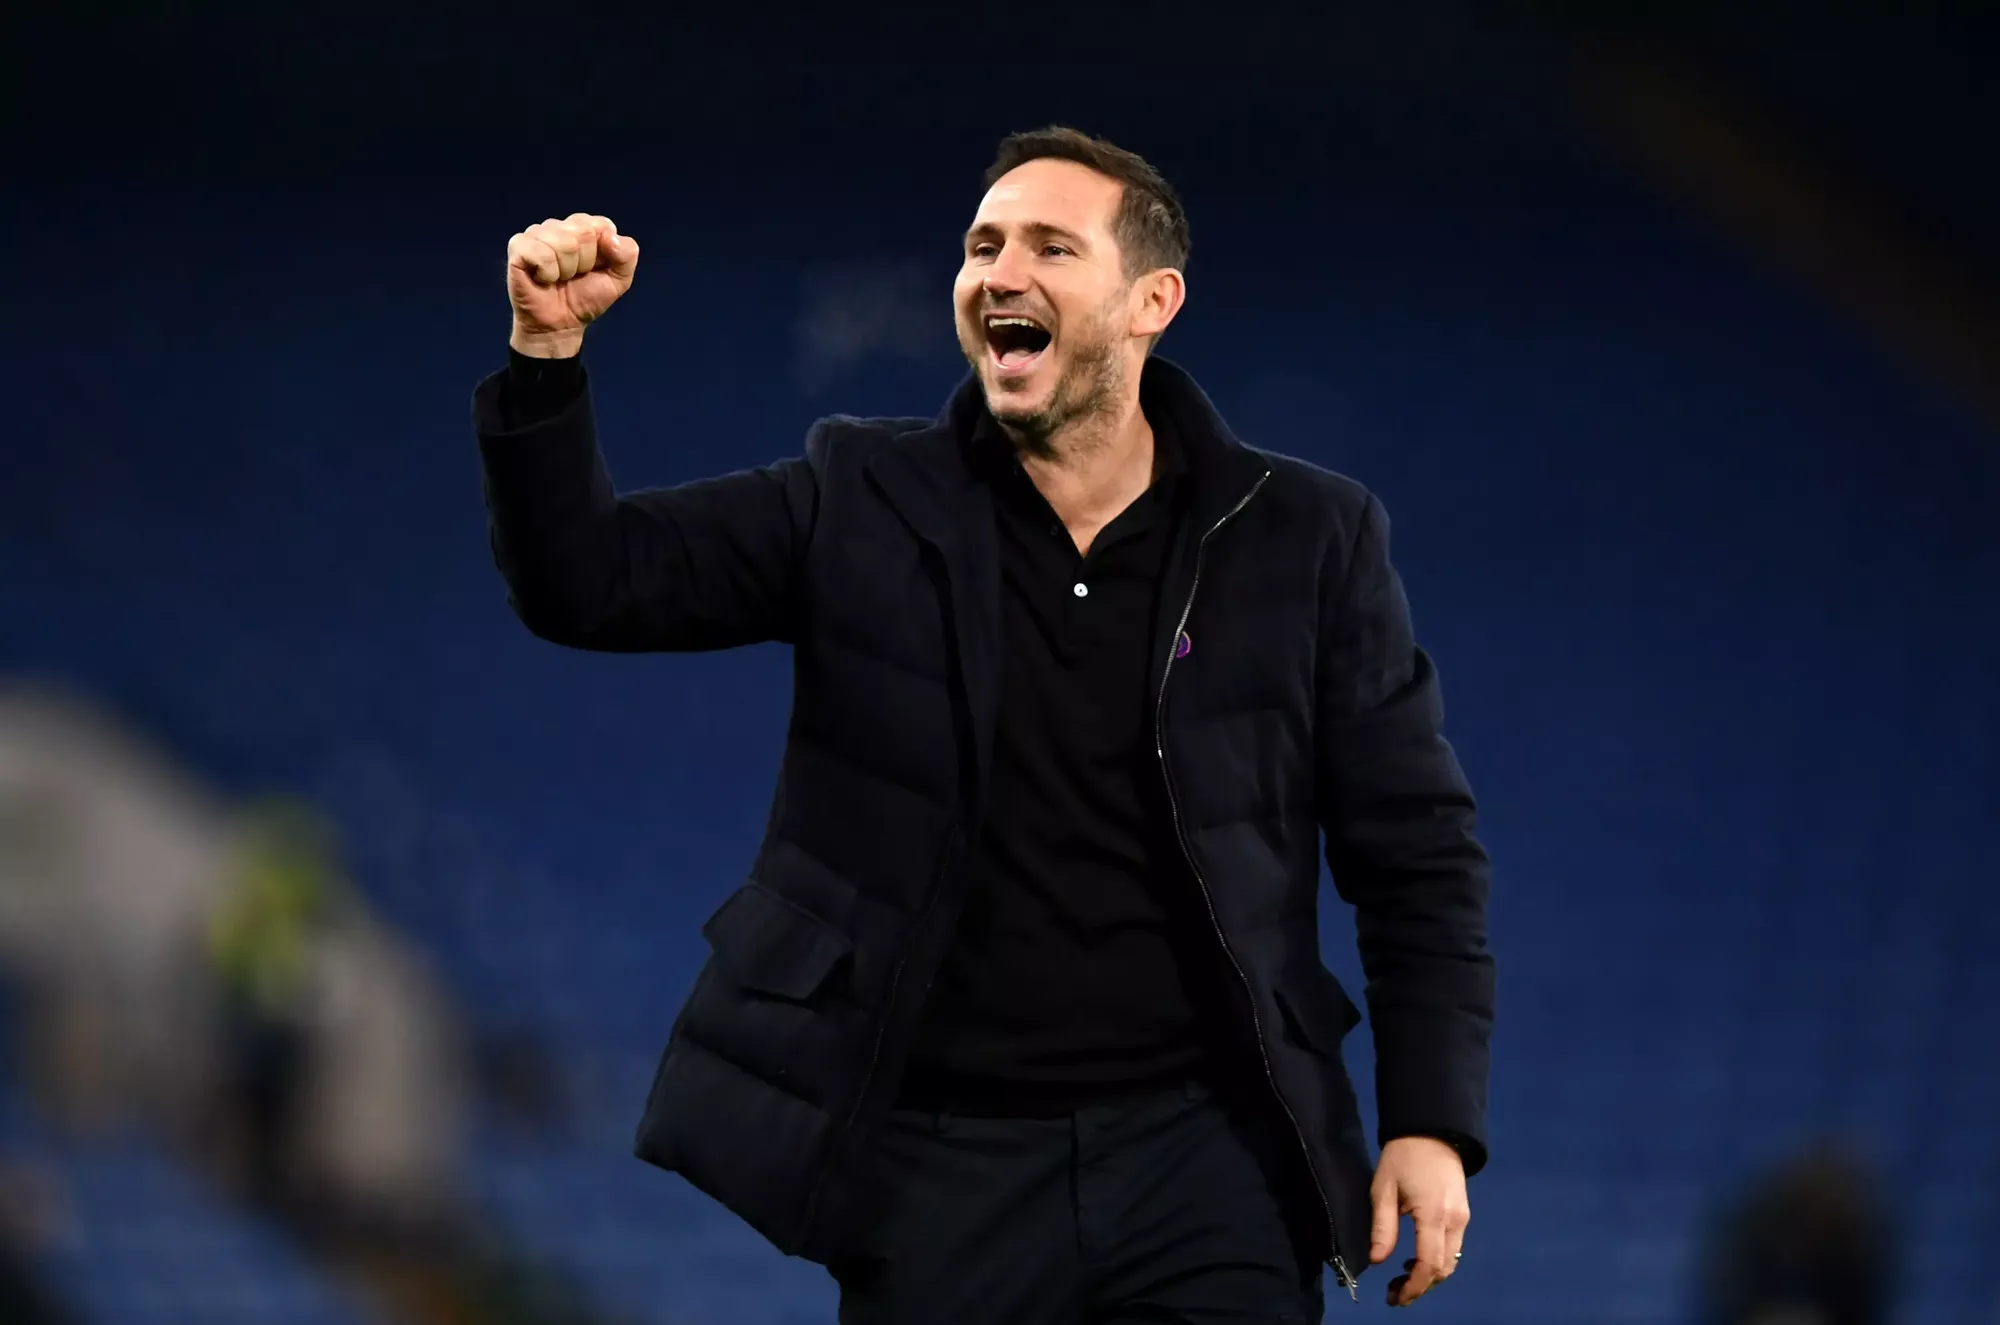 Former Chelsea player and coach Frank Lampard